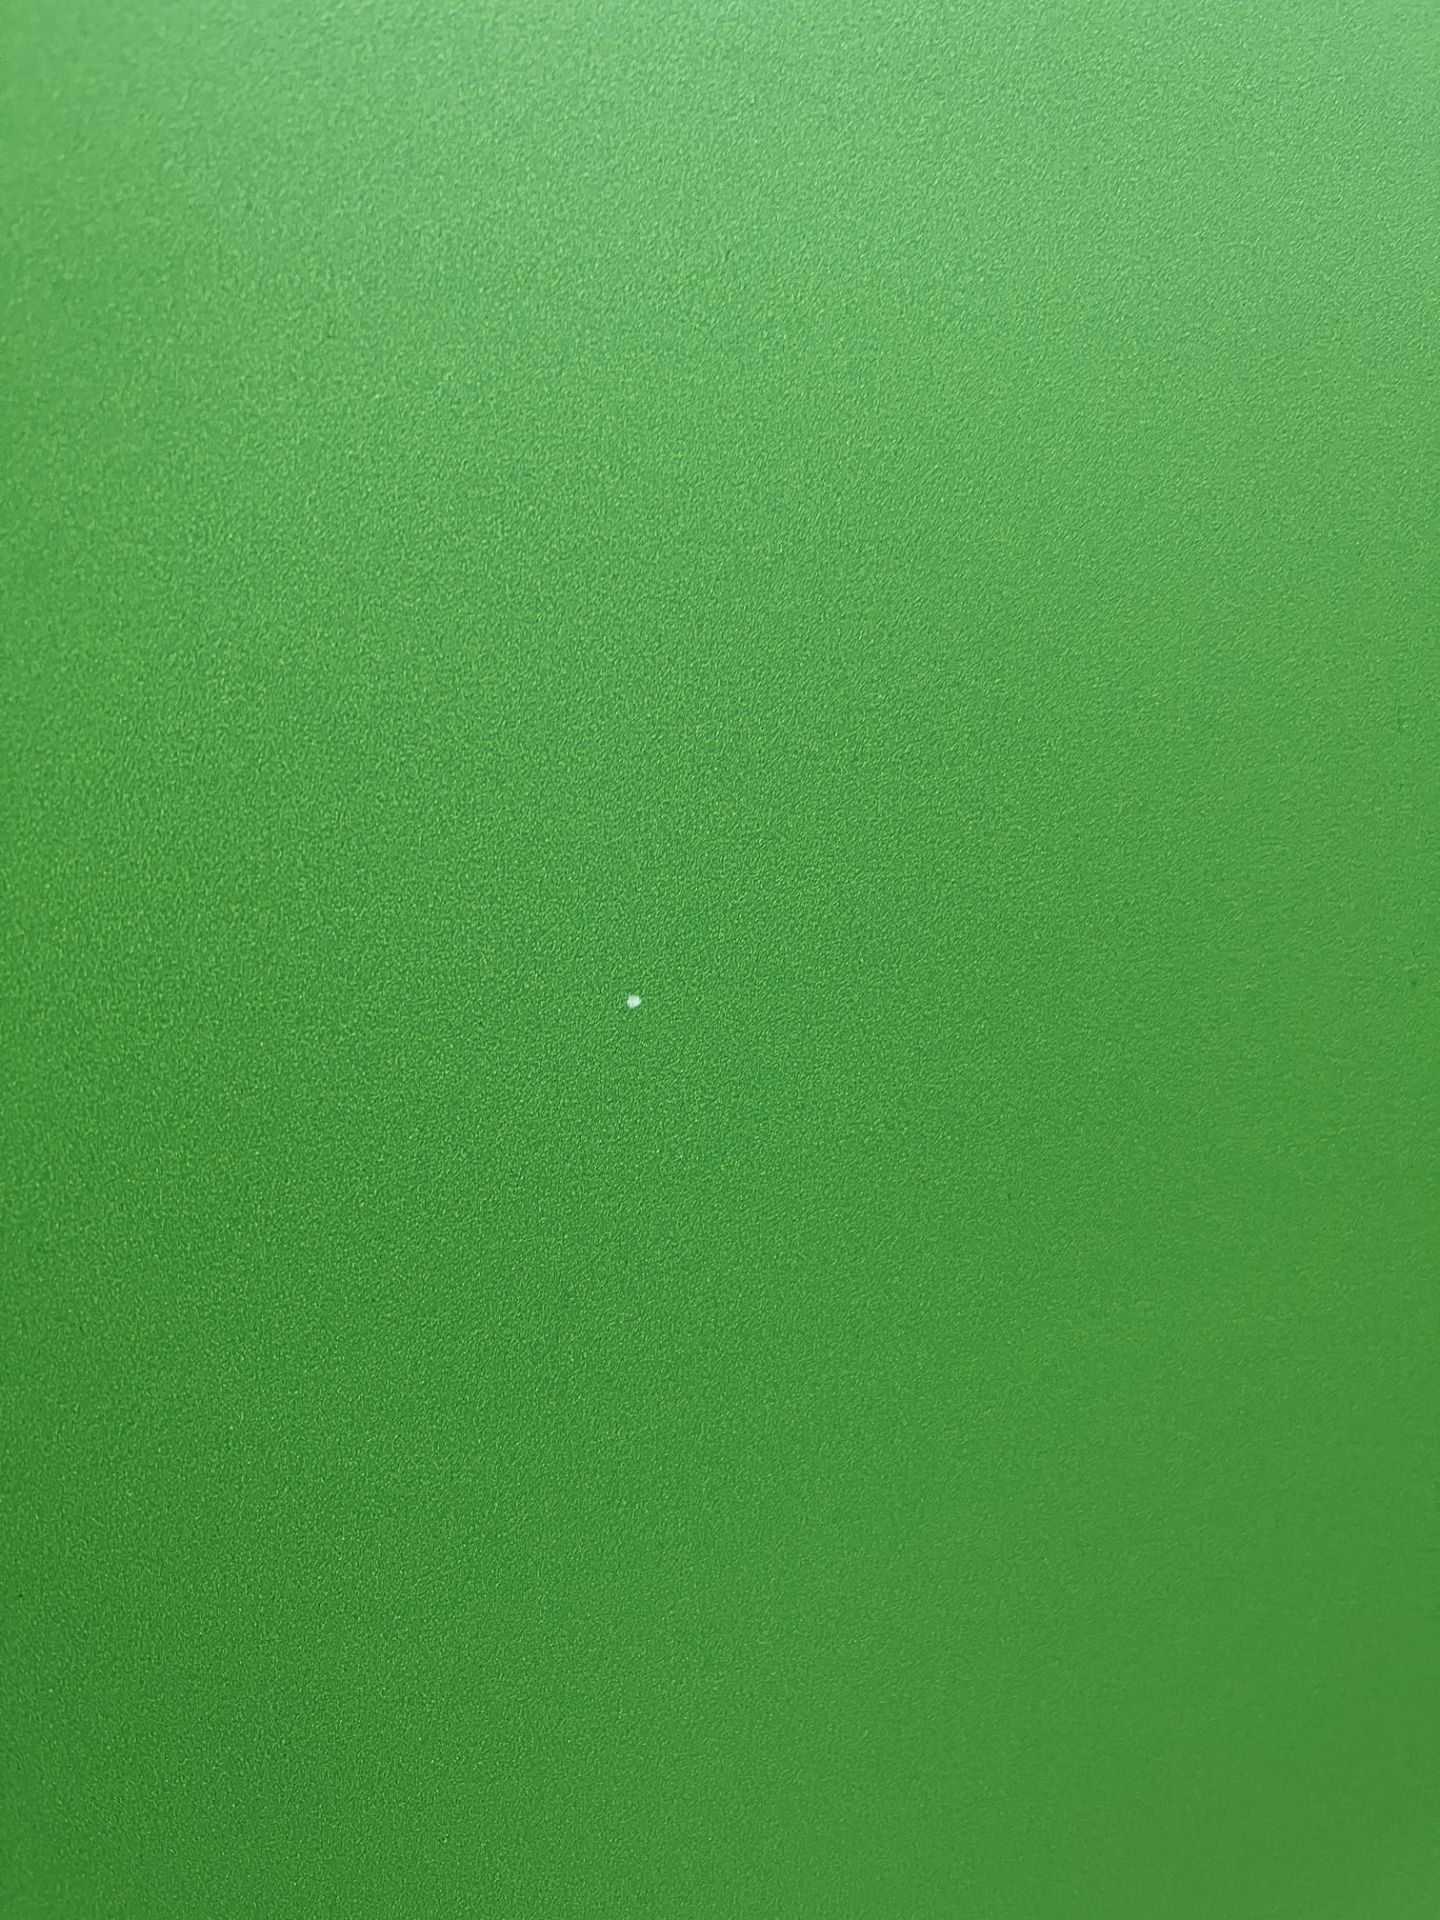 3 x Collapsable Green Screens - As pictured - Image 7 of 10